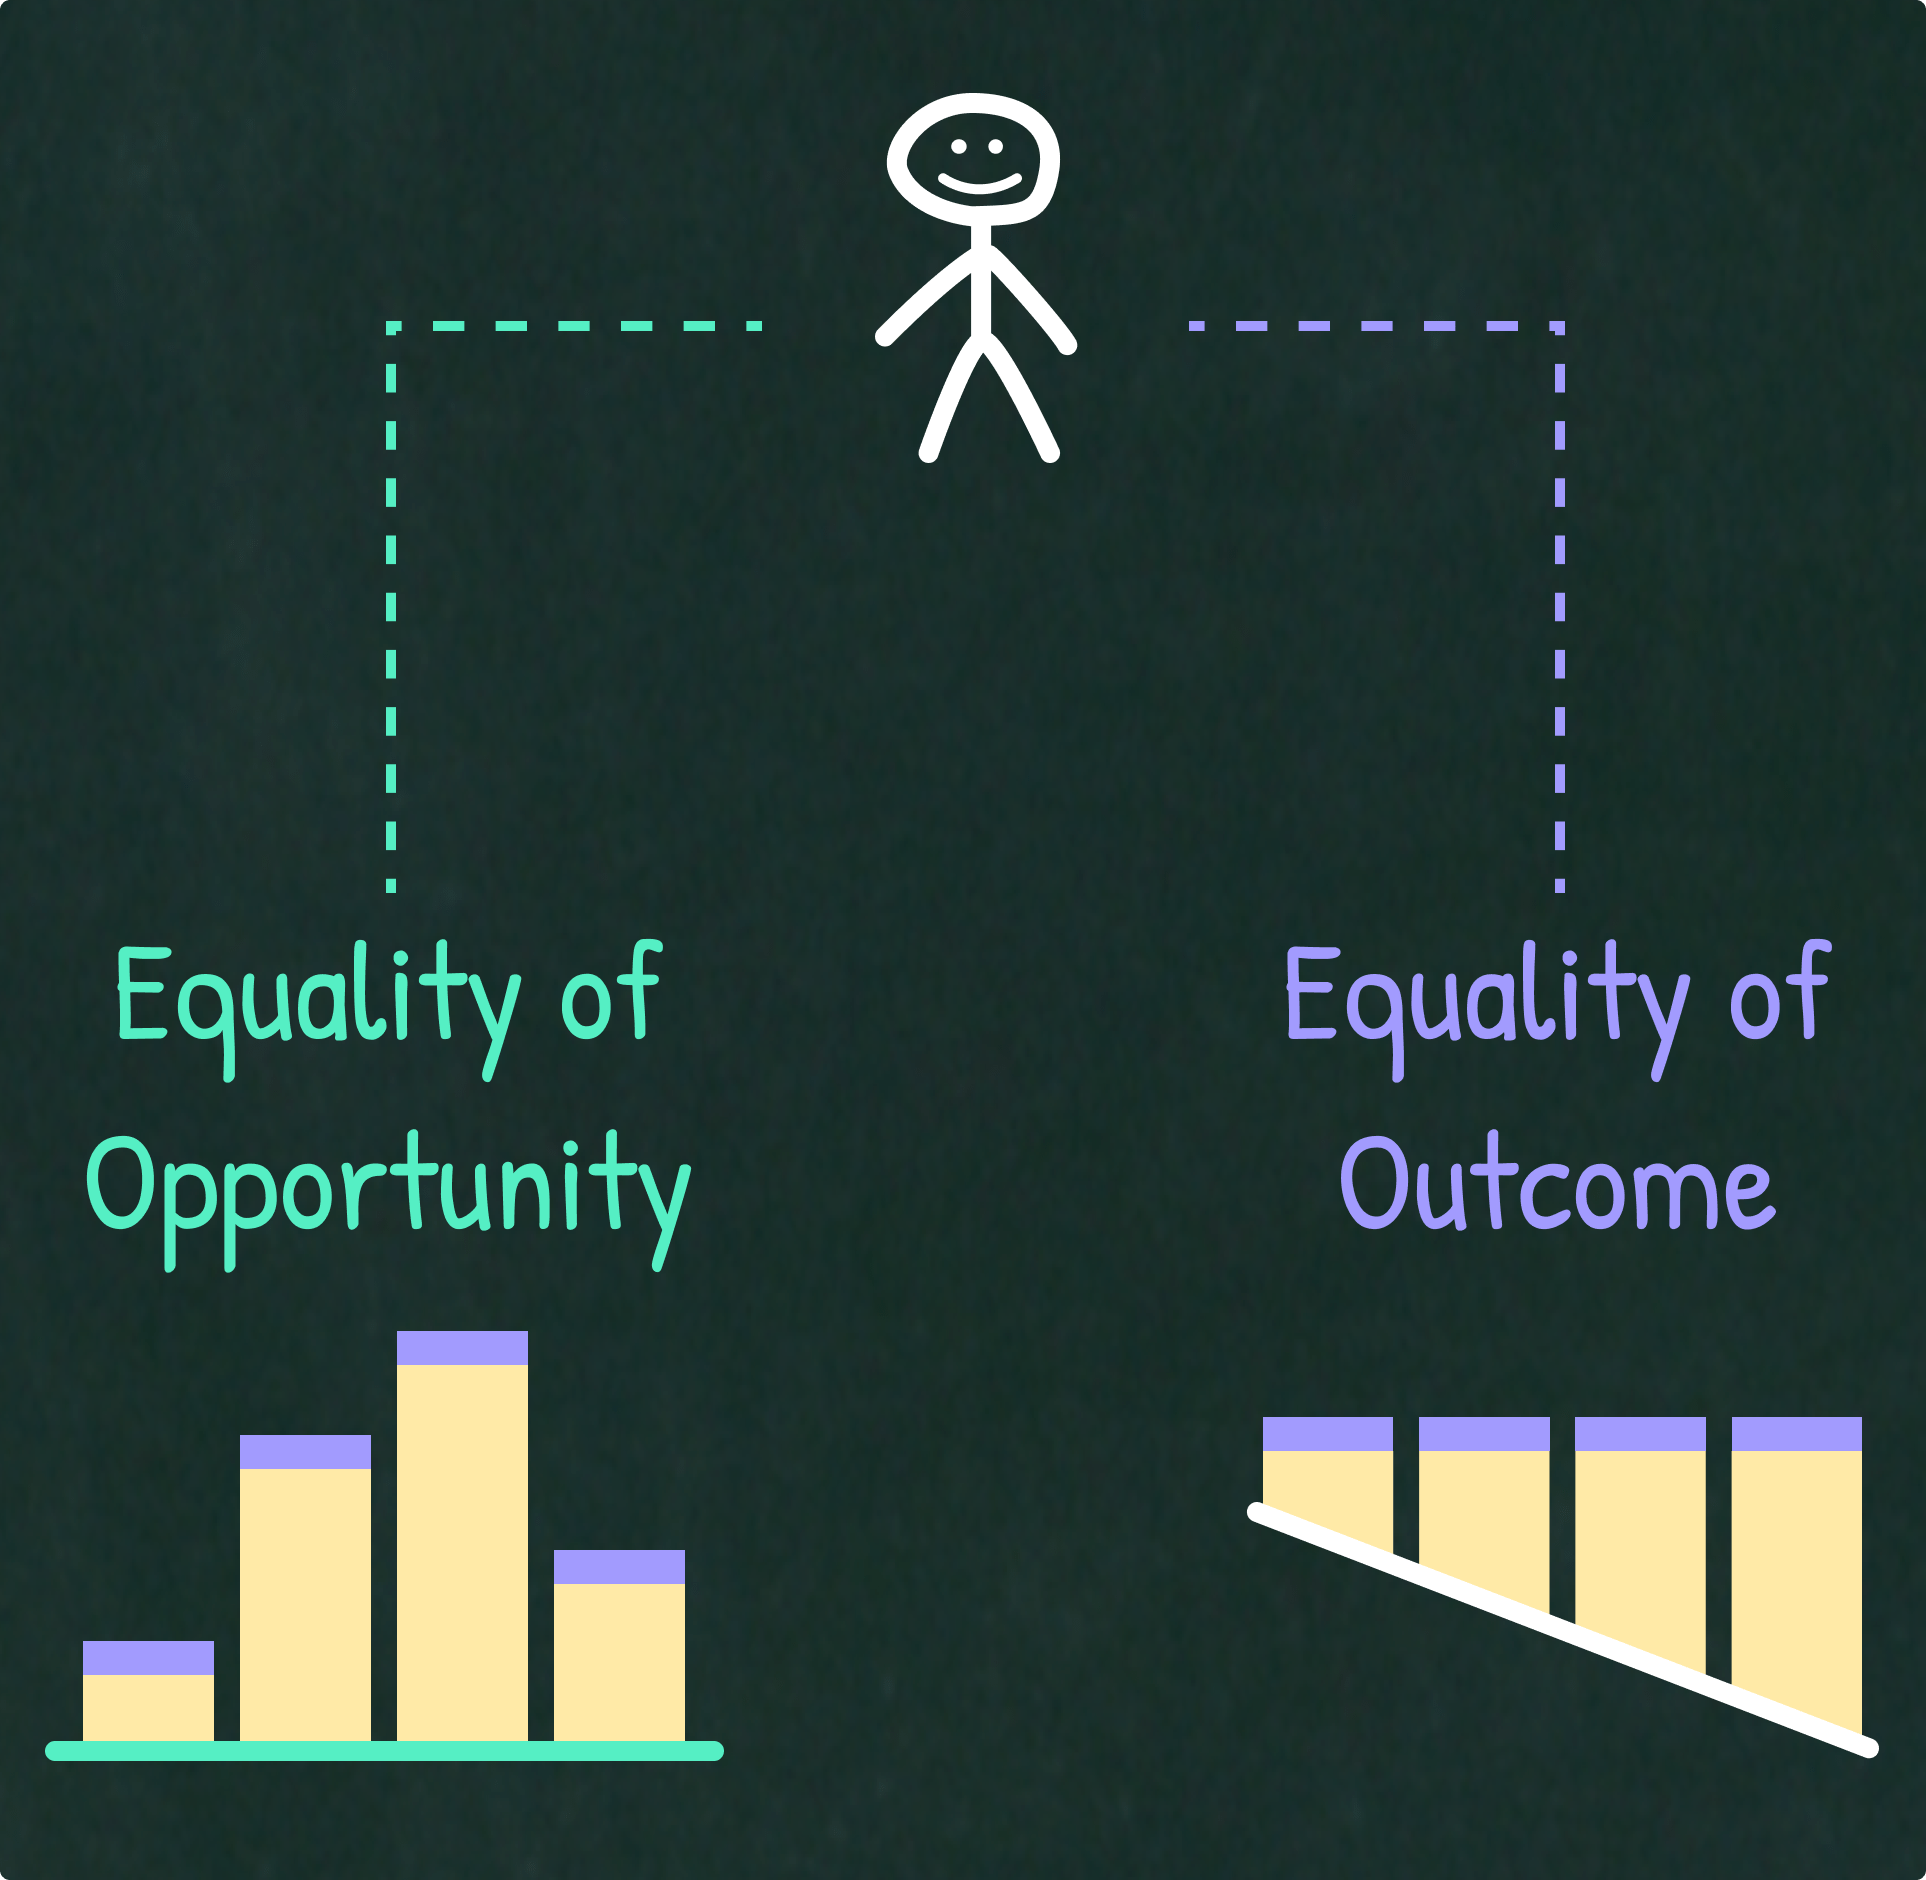 Contrast between Equality of Opportunity and Equality of Outcome